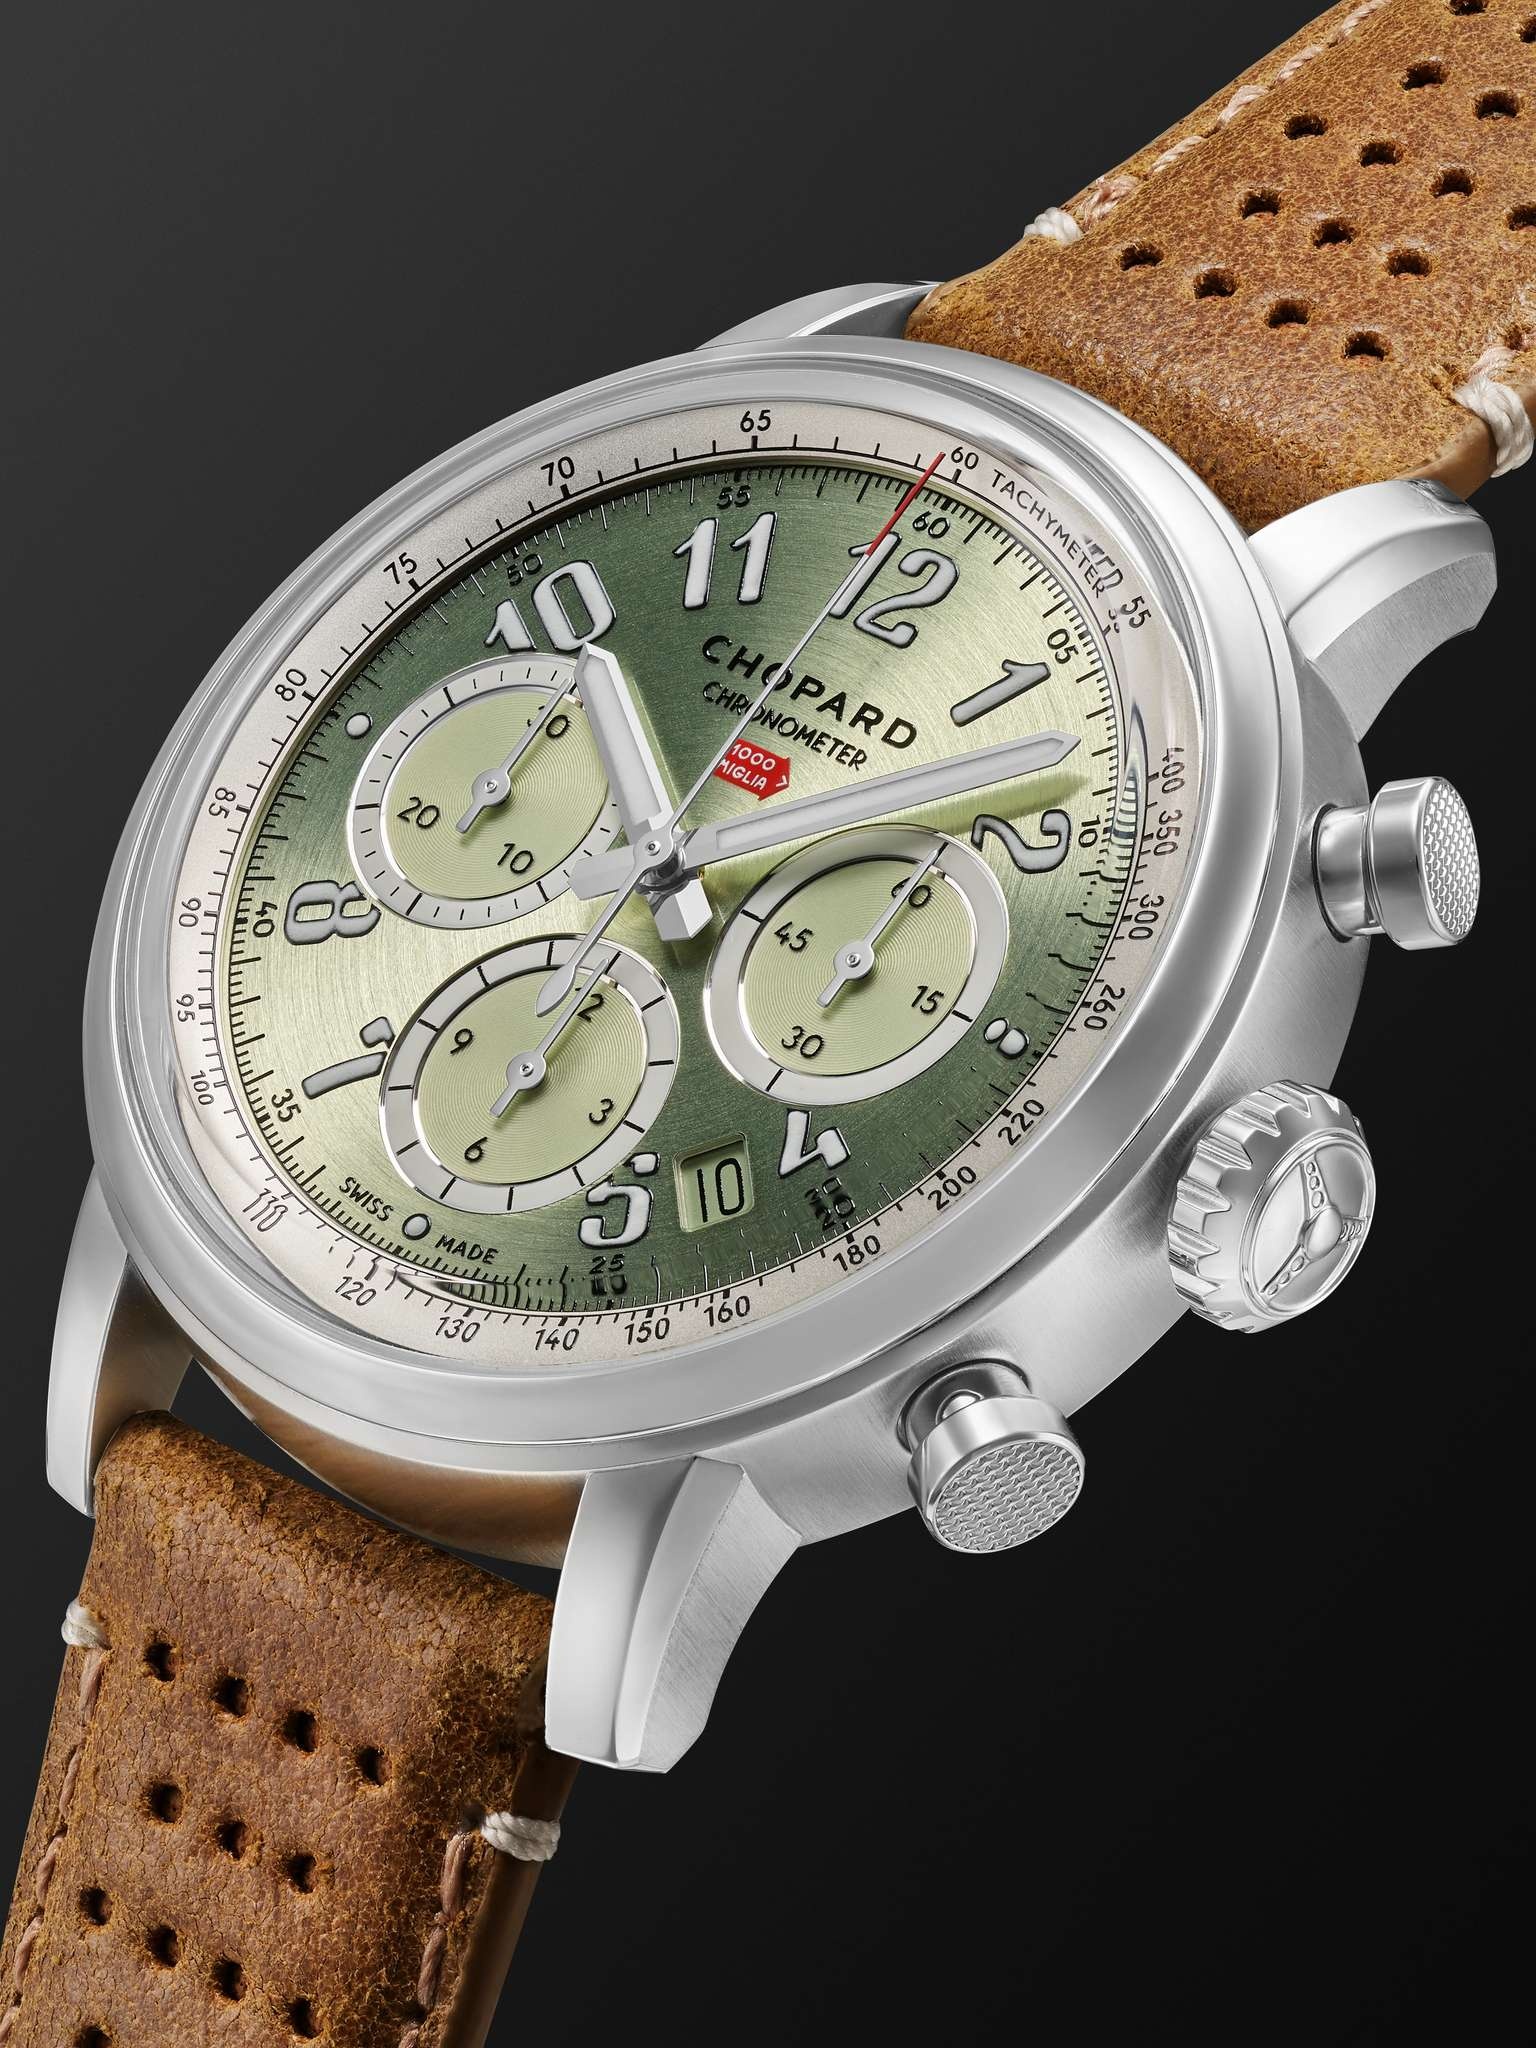 Mille Miglia Classic Automatic Chronograph 40.5mm Stainless Steel and Leather Watch, Ref. No. 168619 - 4